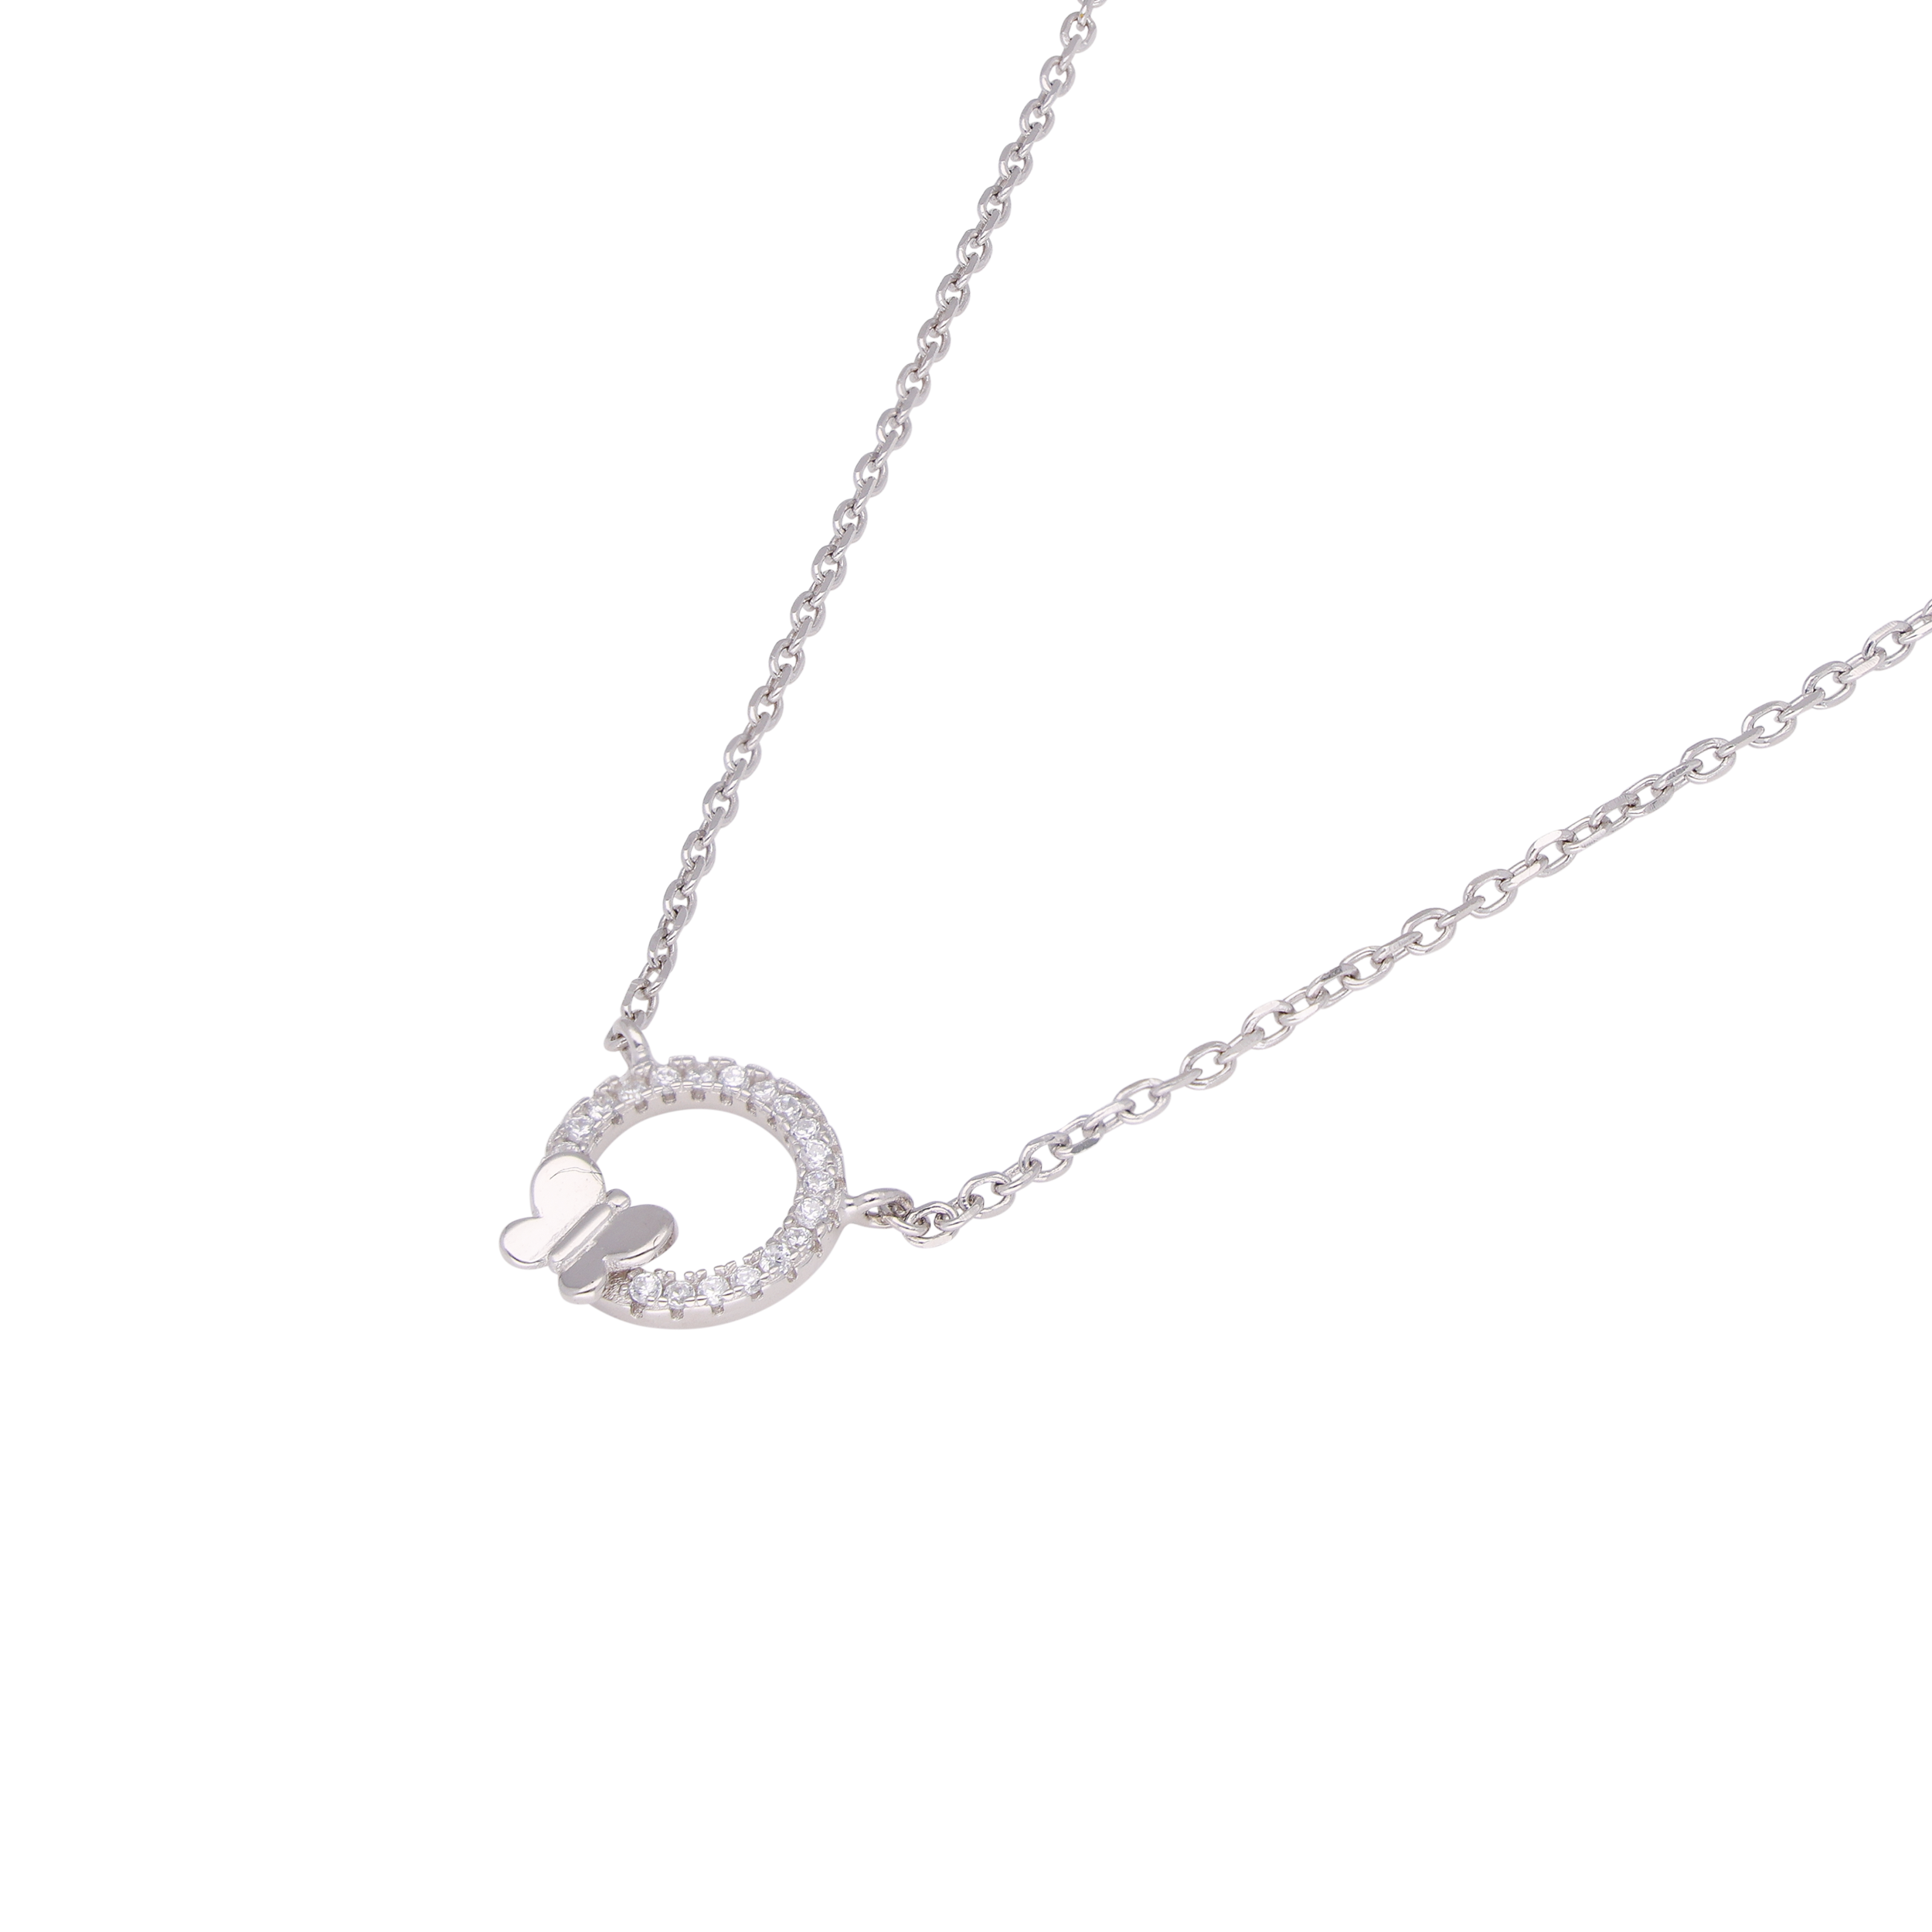 Butterfly Radiance: Sterling Silver Chain | SKU: 0002984117, 0019258584, 0002983899